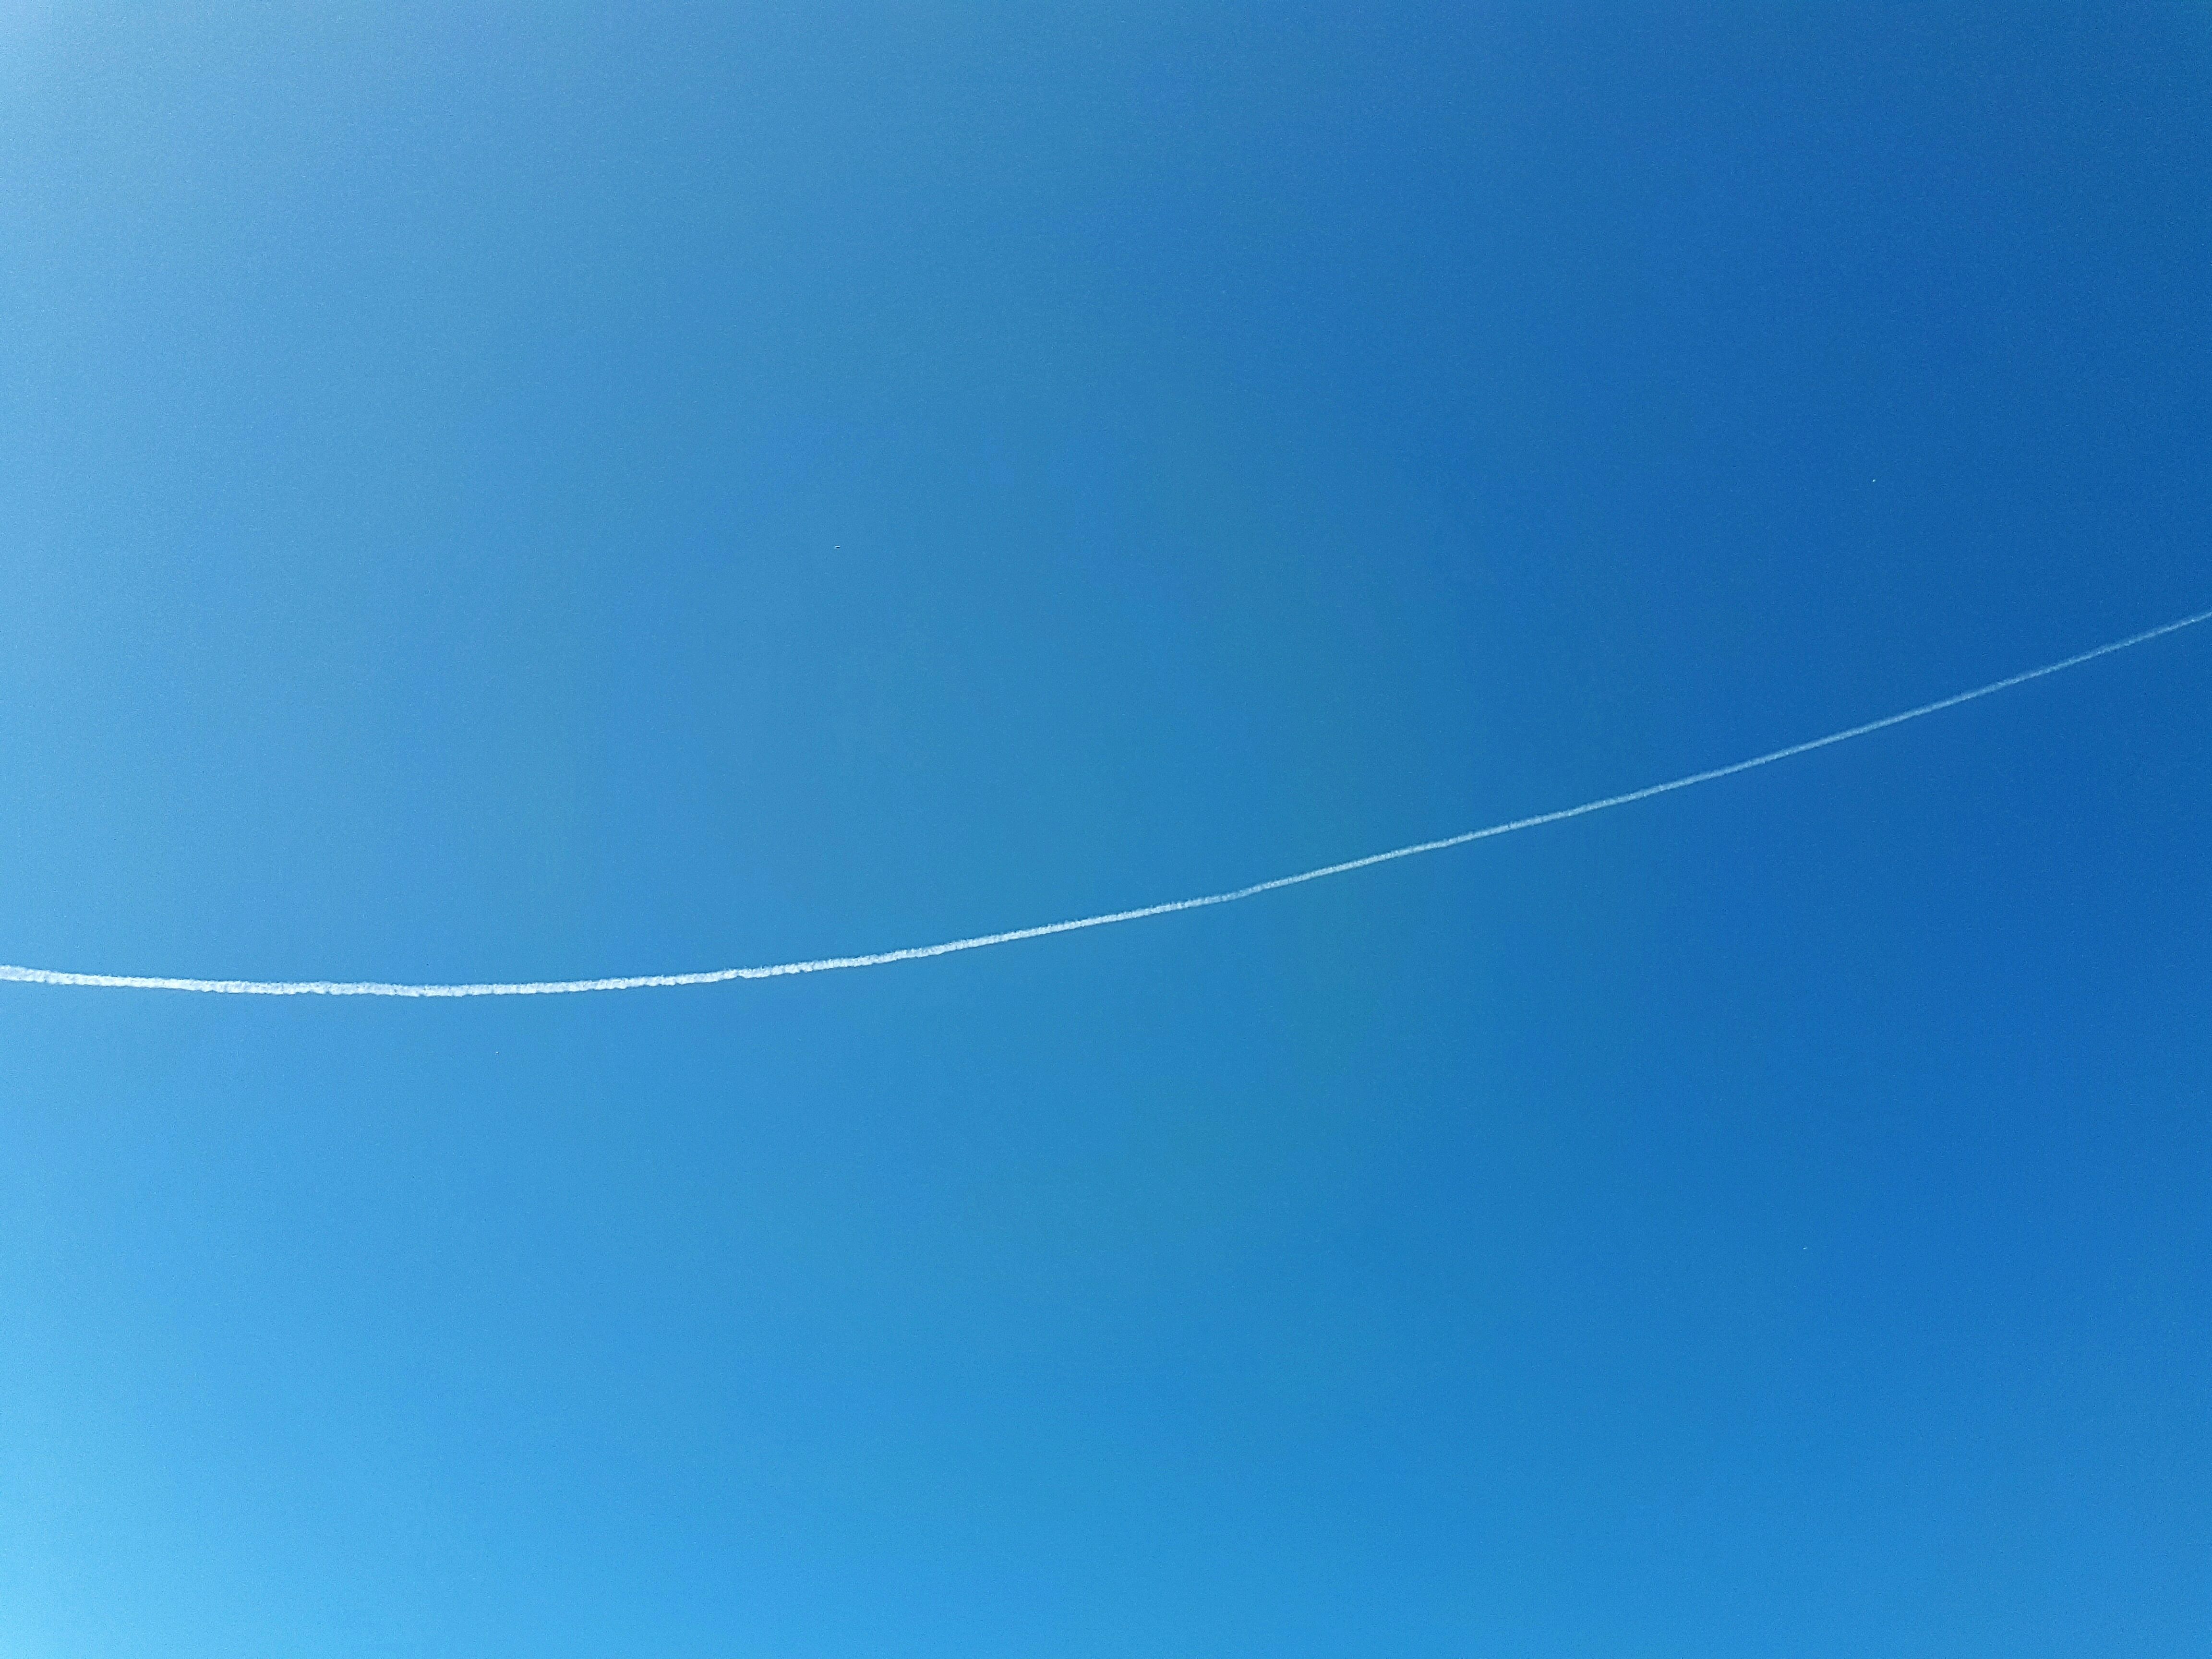 aircraft draws in the sky